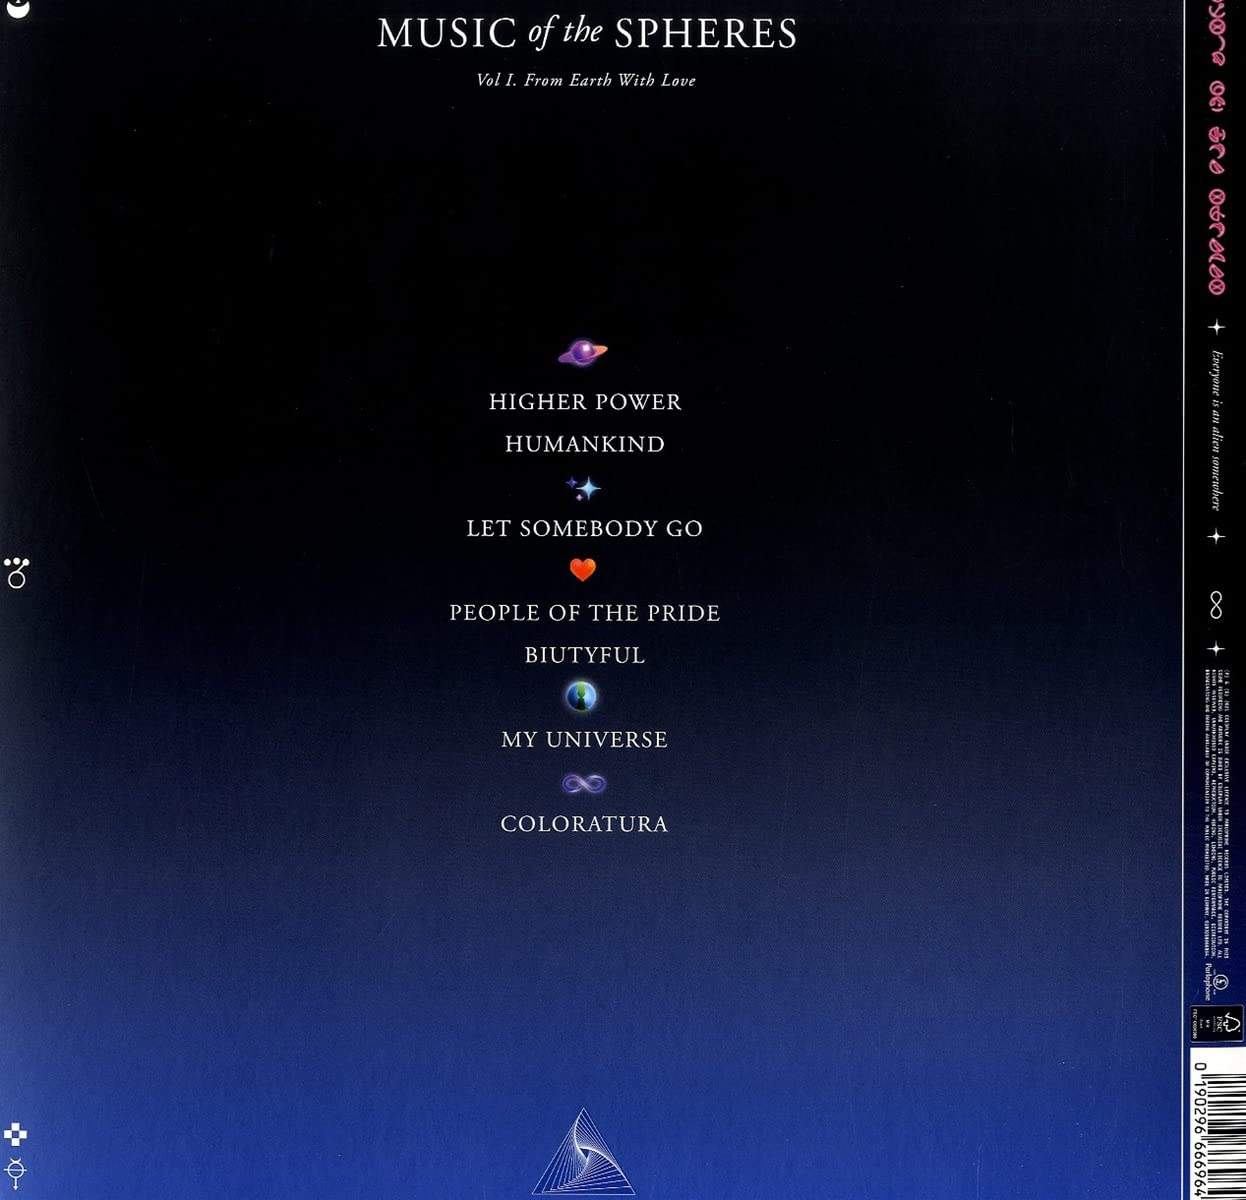 coldplay-music-of-the-spheres-vinyl-record-album-back